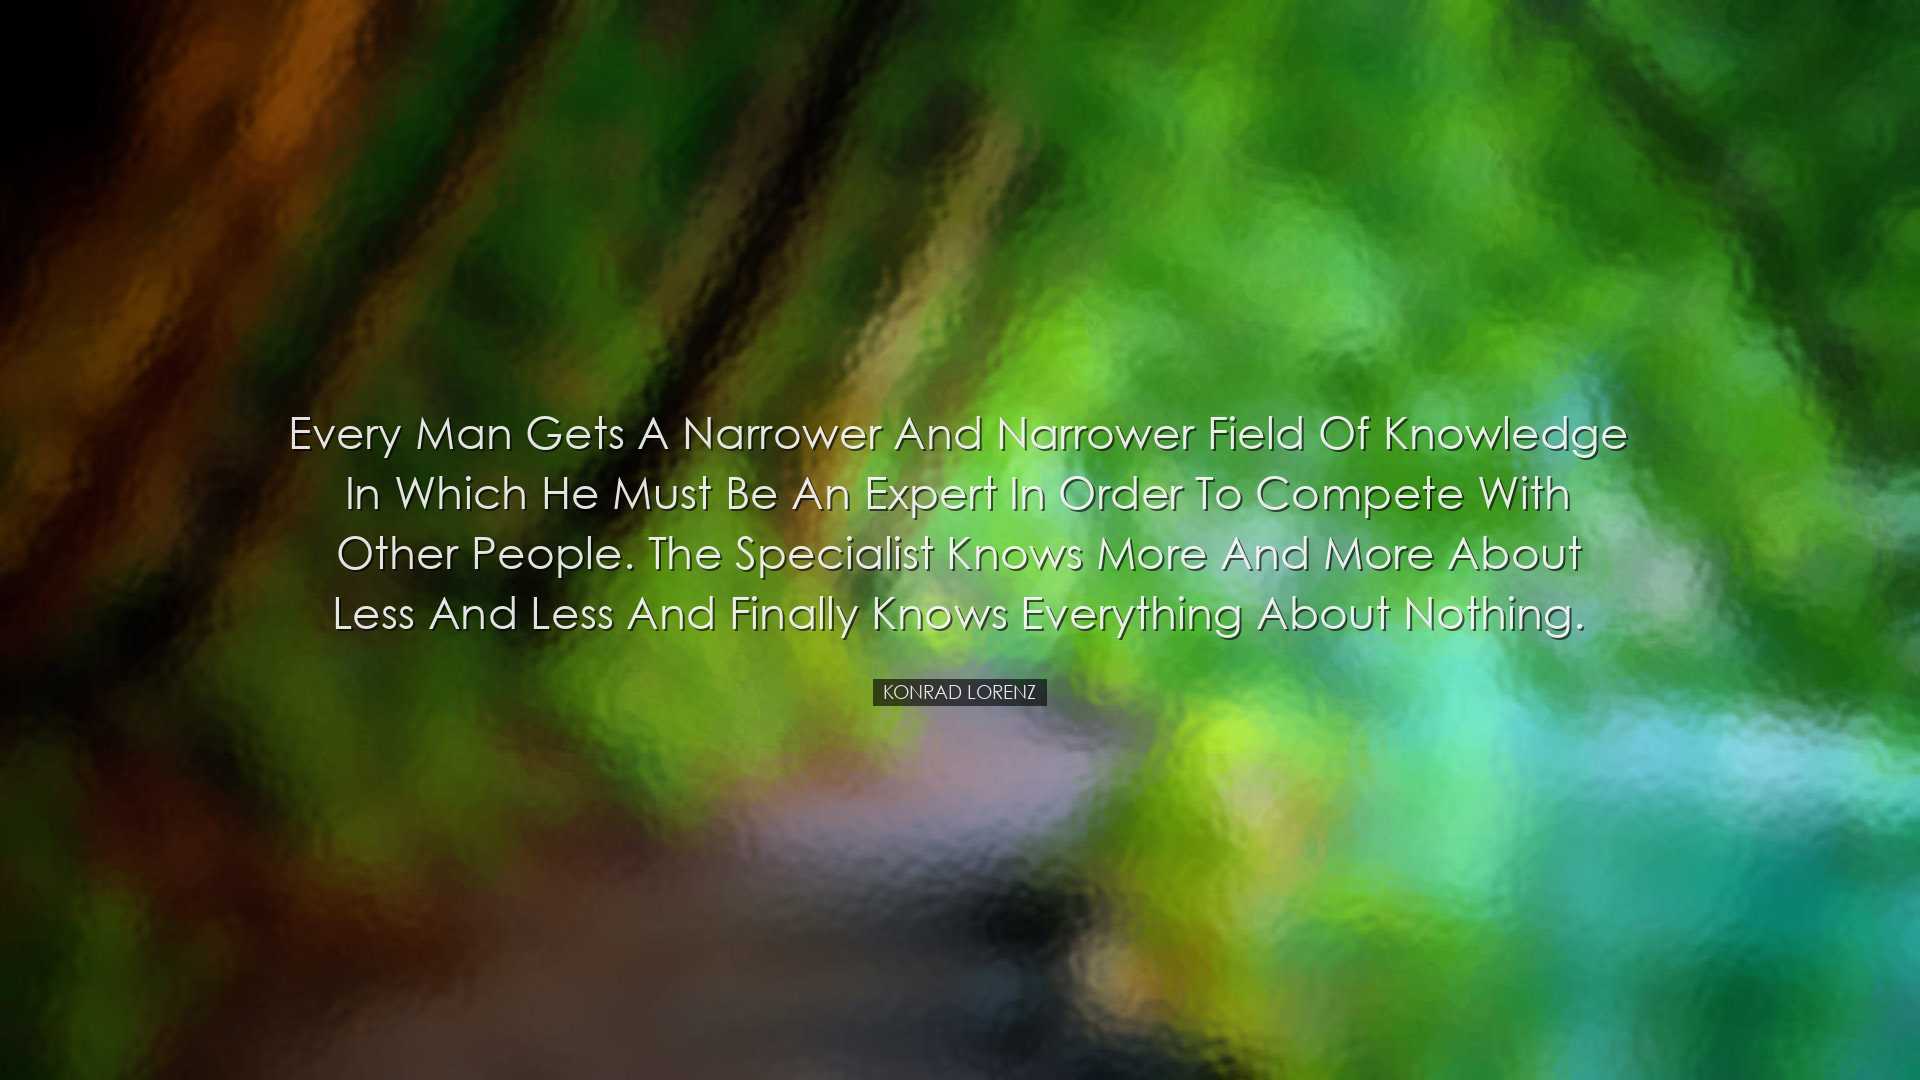 Every man gets a narrower and narrower field of knowledge in which